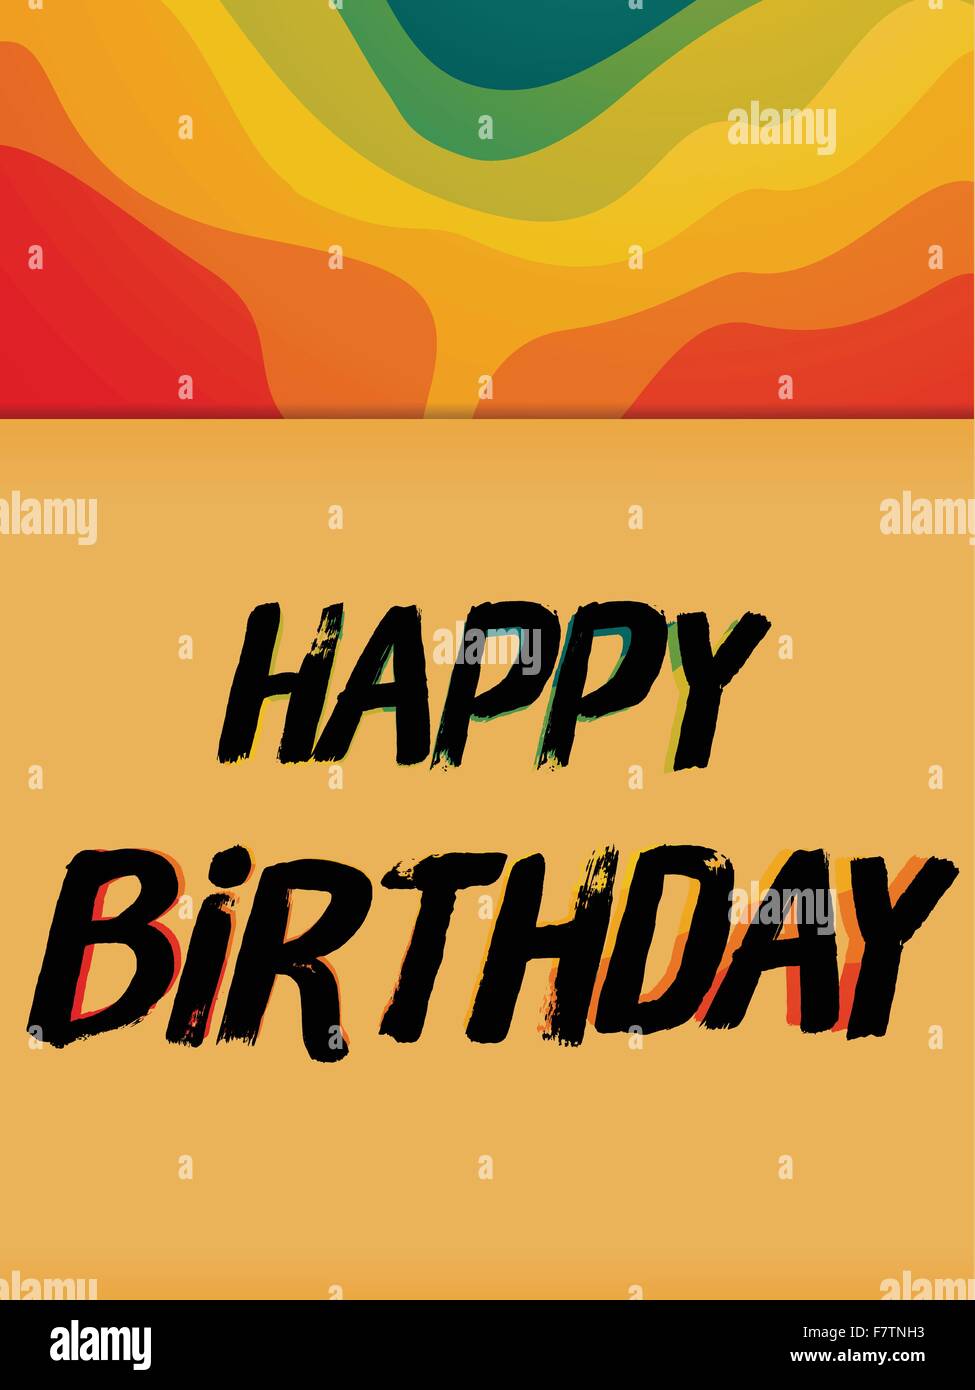 Happy Birthday Colorful Background Card Stock Vector